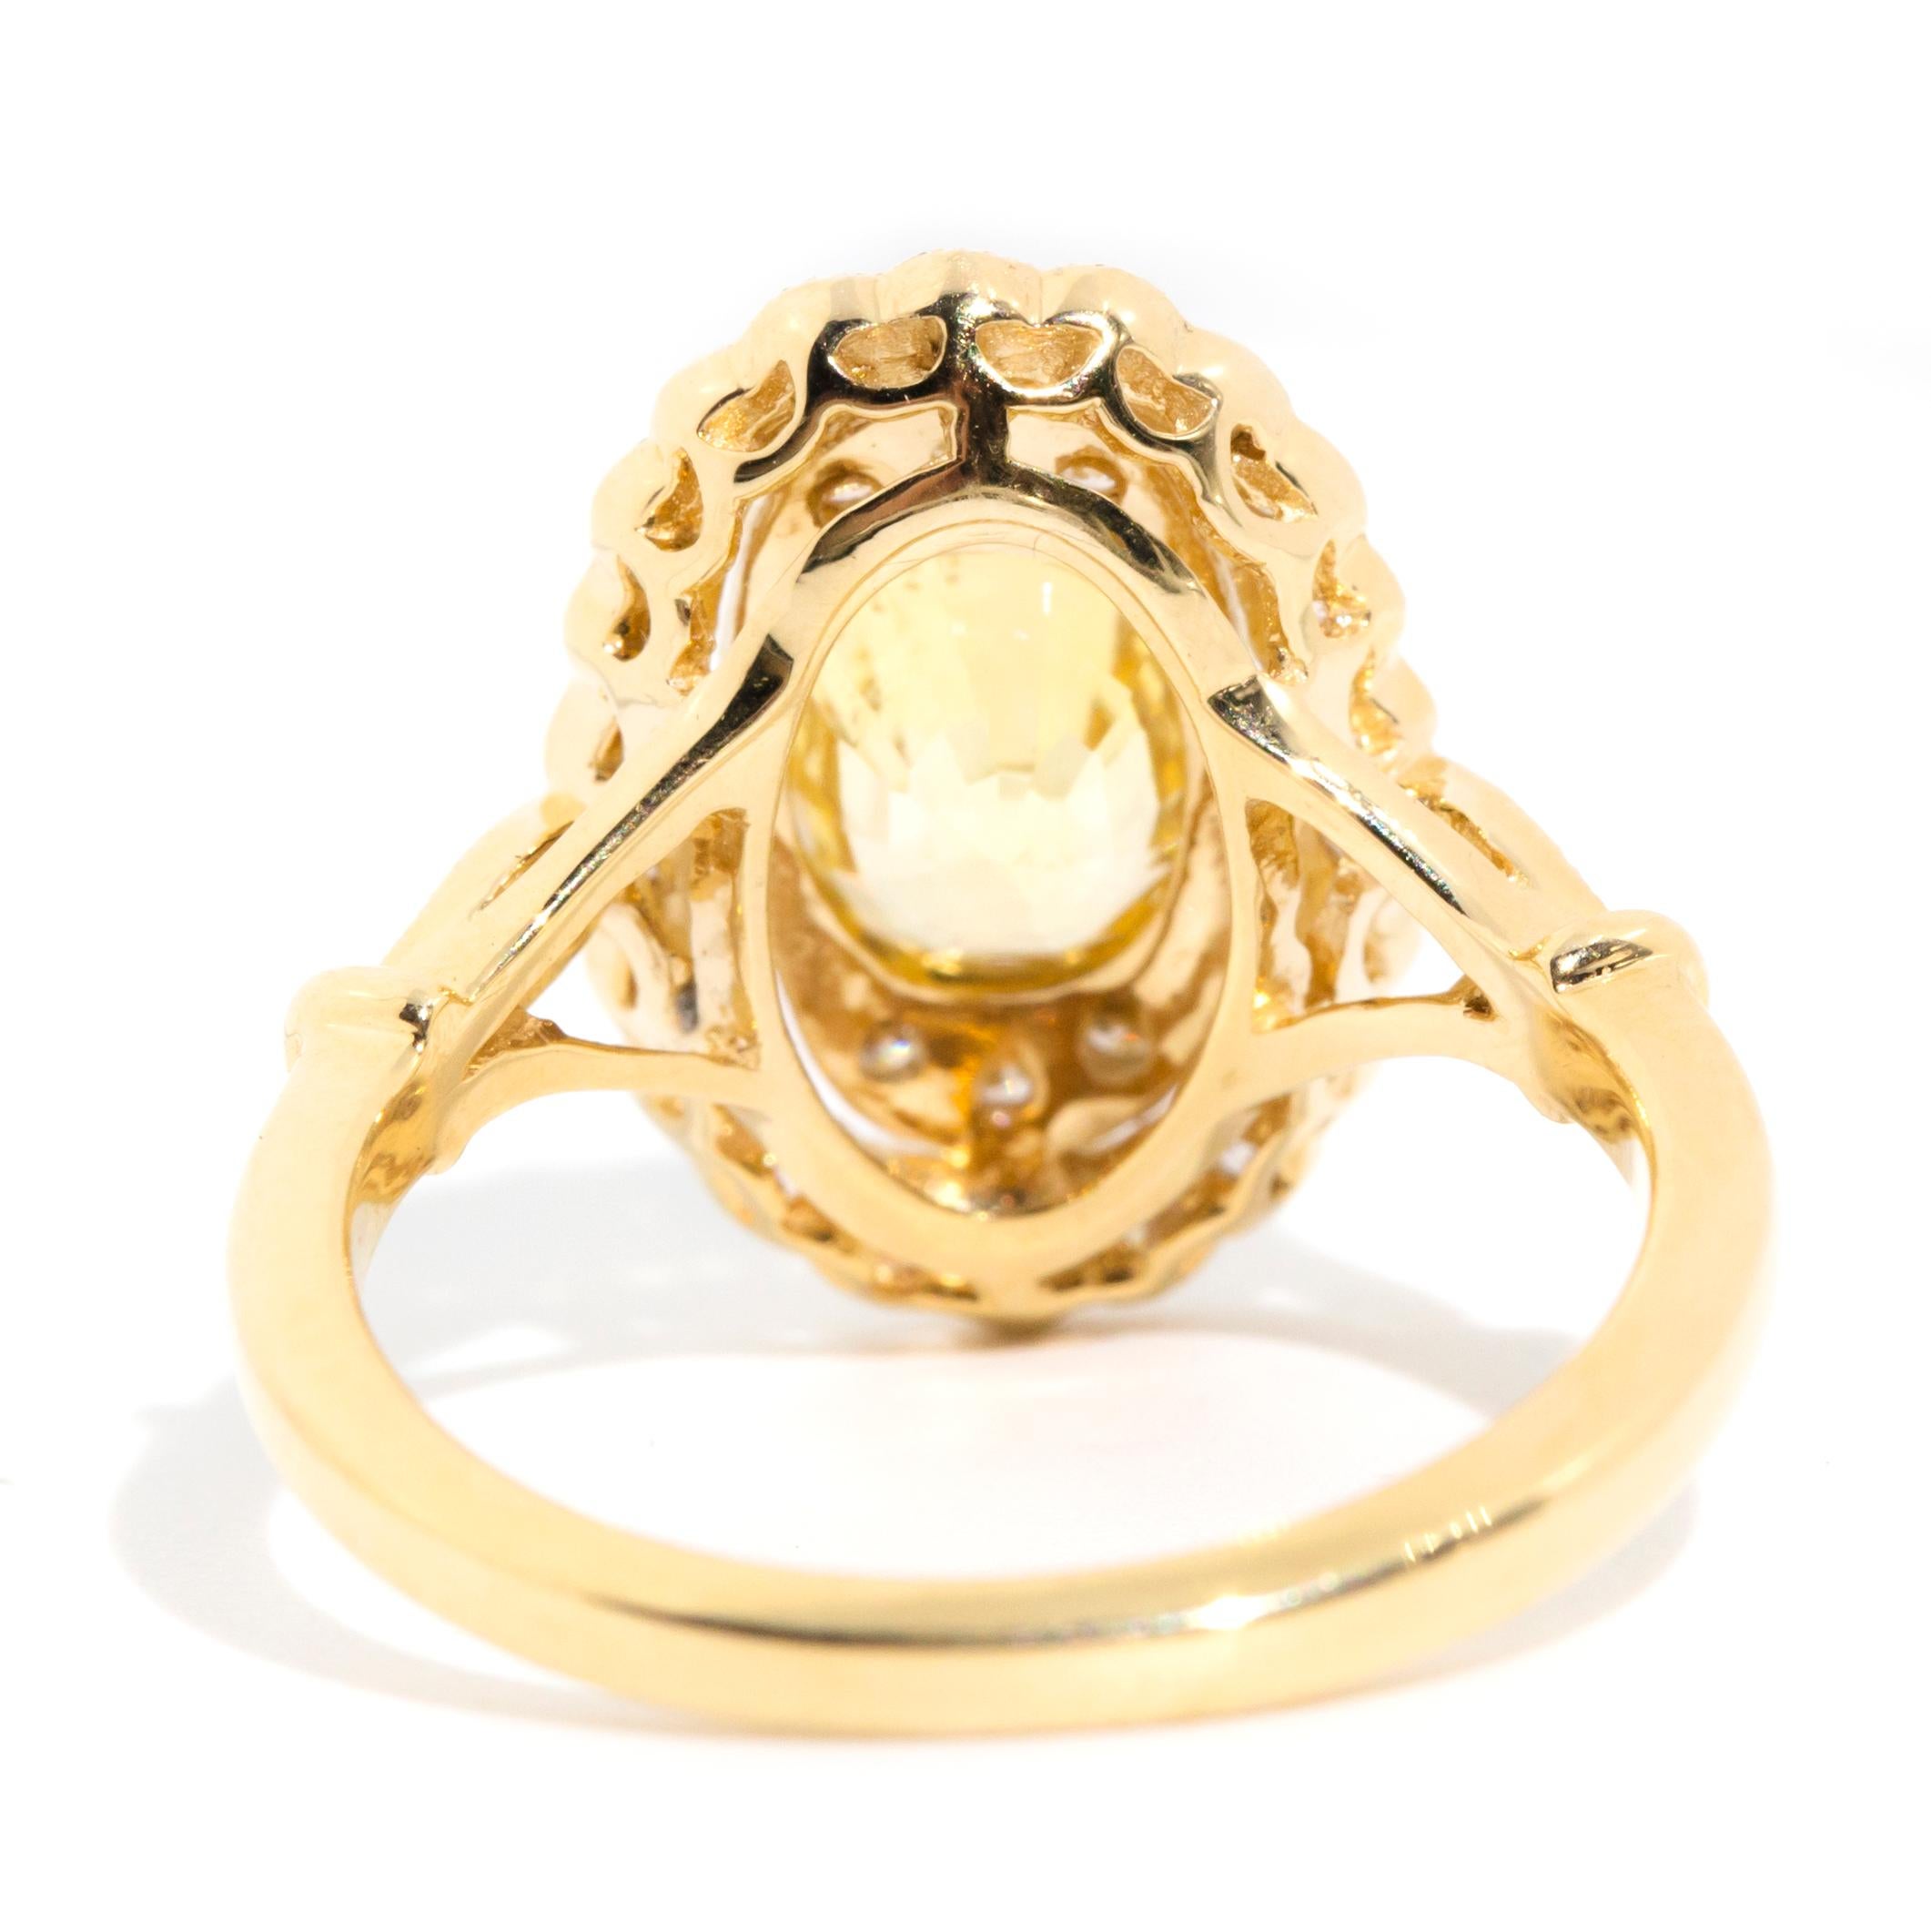 2.33 Carat Yellow Ceylon Sapphire and Diamond Halo Ring in 18 Carat Yellow Gold  For Sale 6